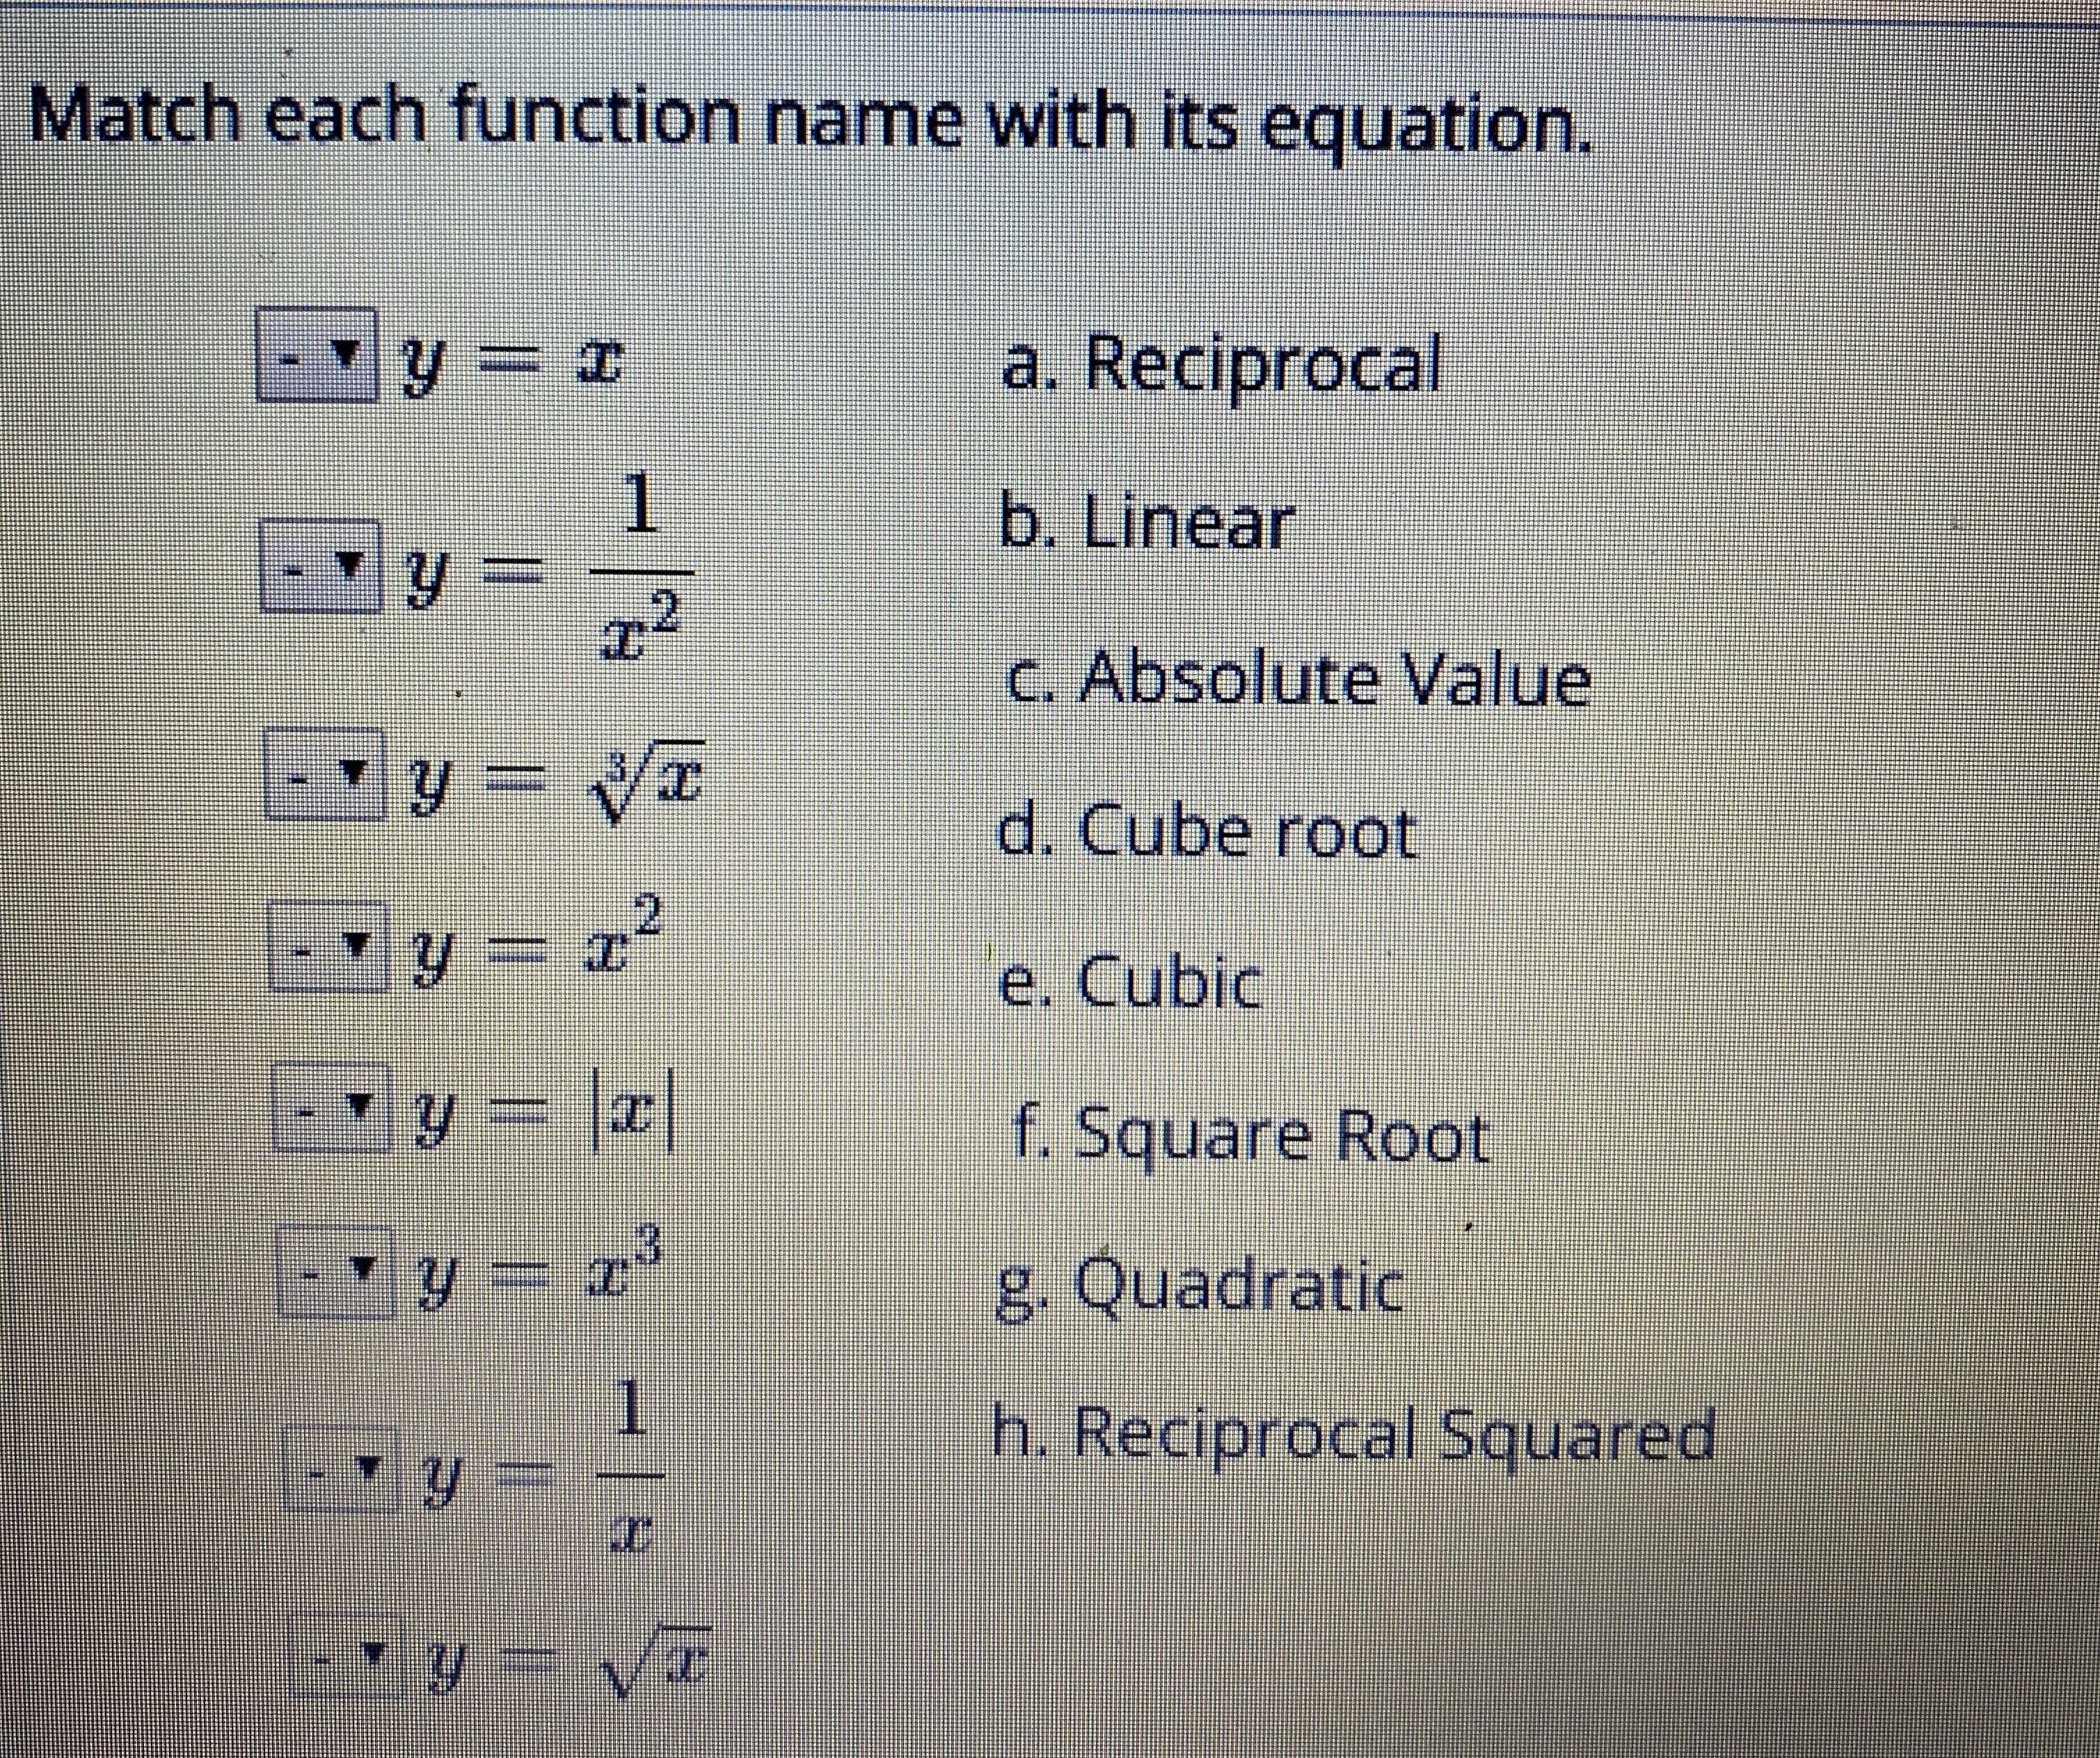 Match each function name with its equation.
a. Reciprocal
1
b.Linear
2
C. Absolute Value
d. Cube root
2.
e. Cubic
f. Square Root
g. Quadratic
1.
y%3D
h. Reciprocal Squared
